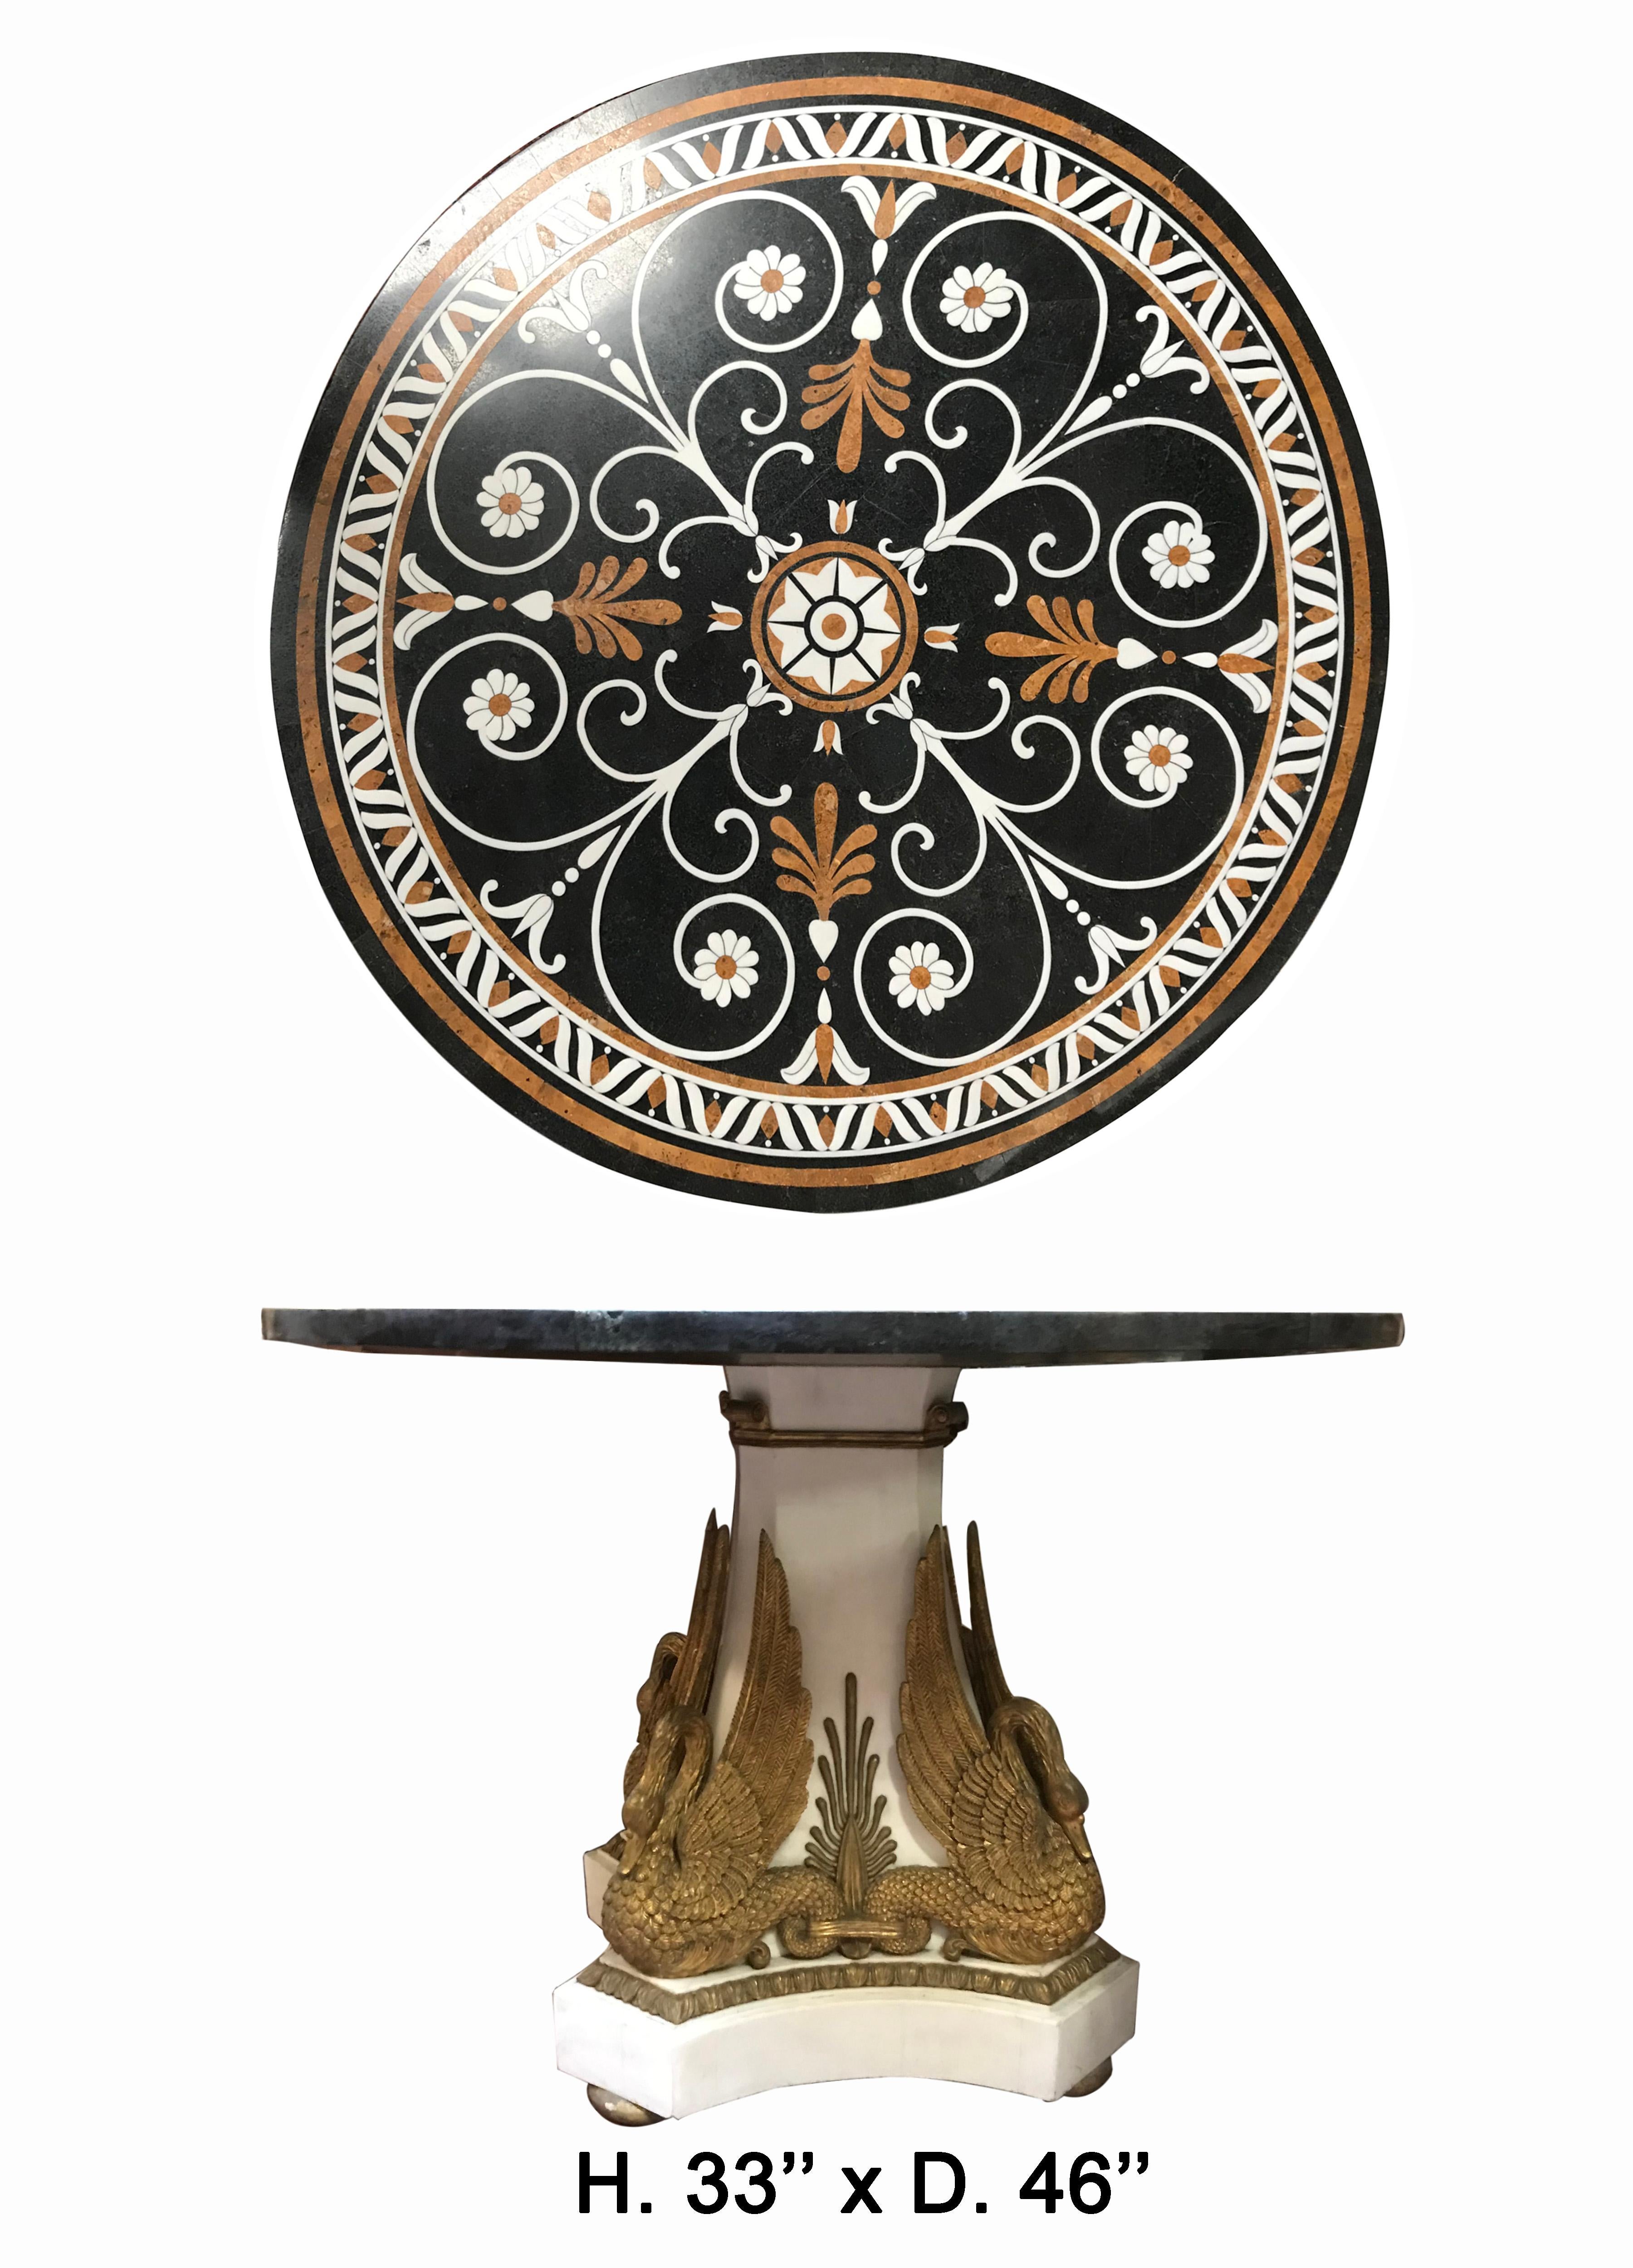 Italian neoclassical style marble round center table.

The round top is beautifully veneered with pretty various marble in a floral and foliate motif, over a white veneered marble tripod base with four fine gilt resin swans, raised on a conforming